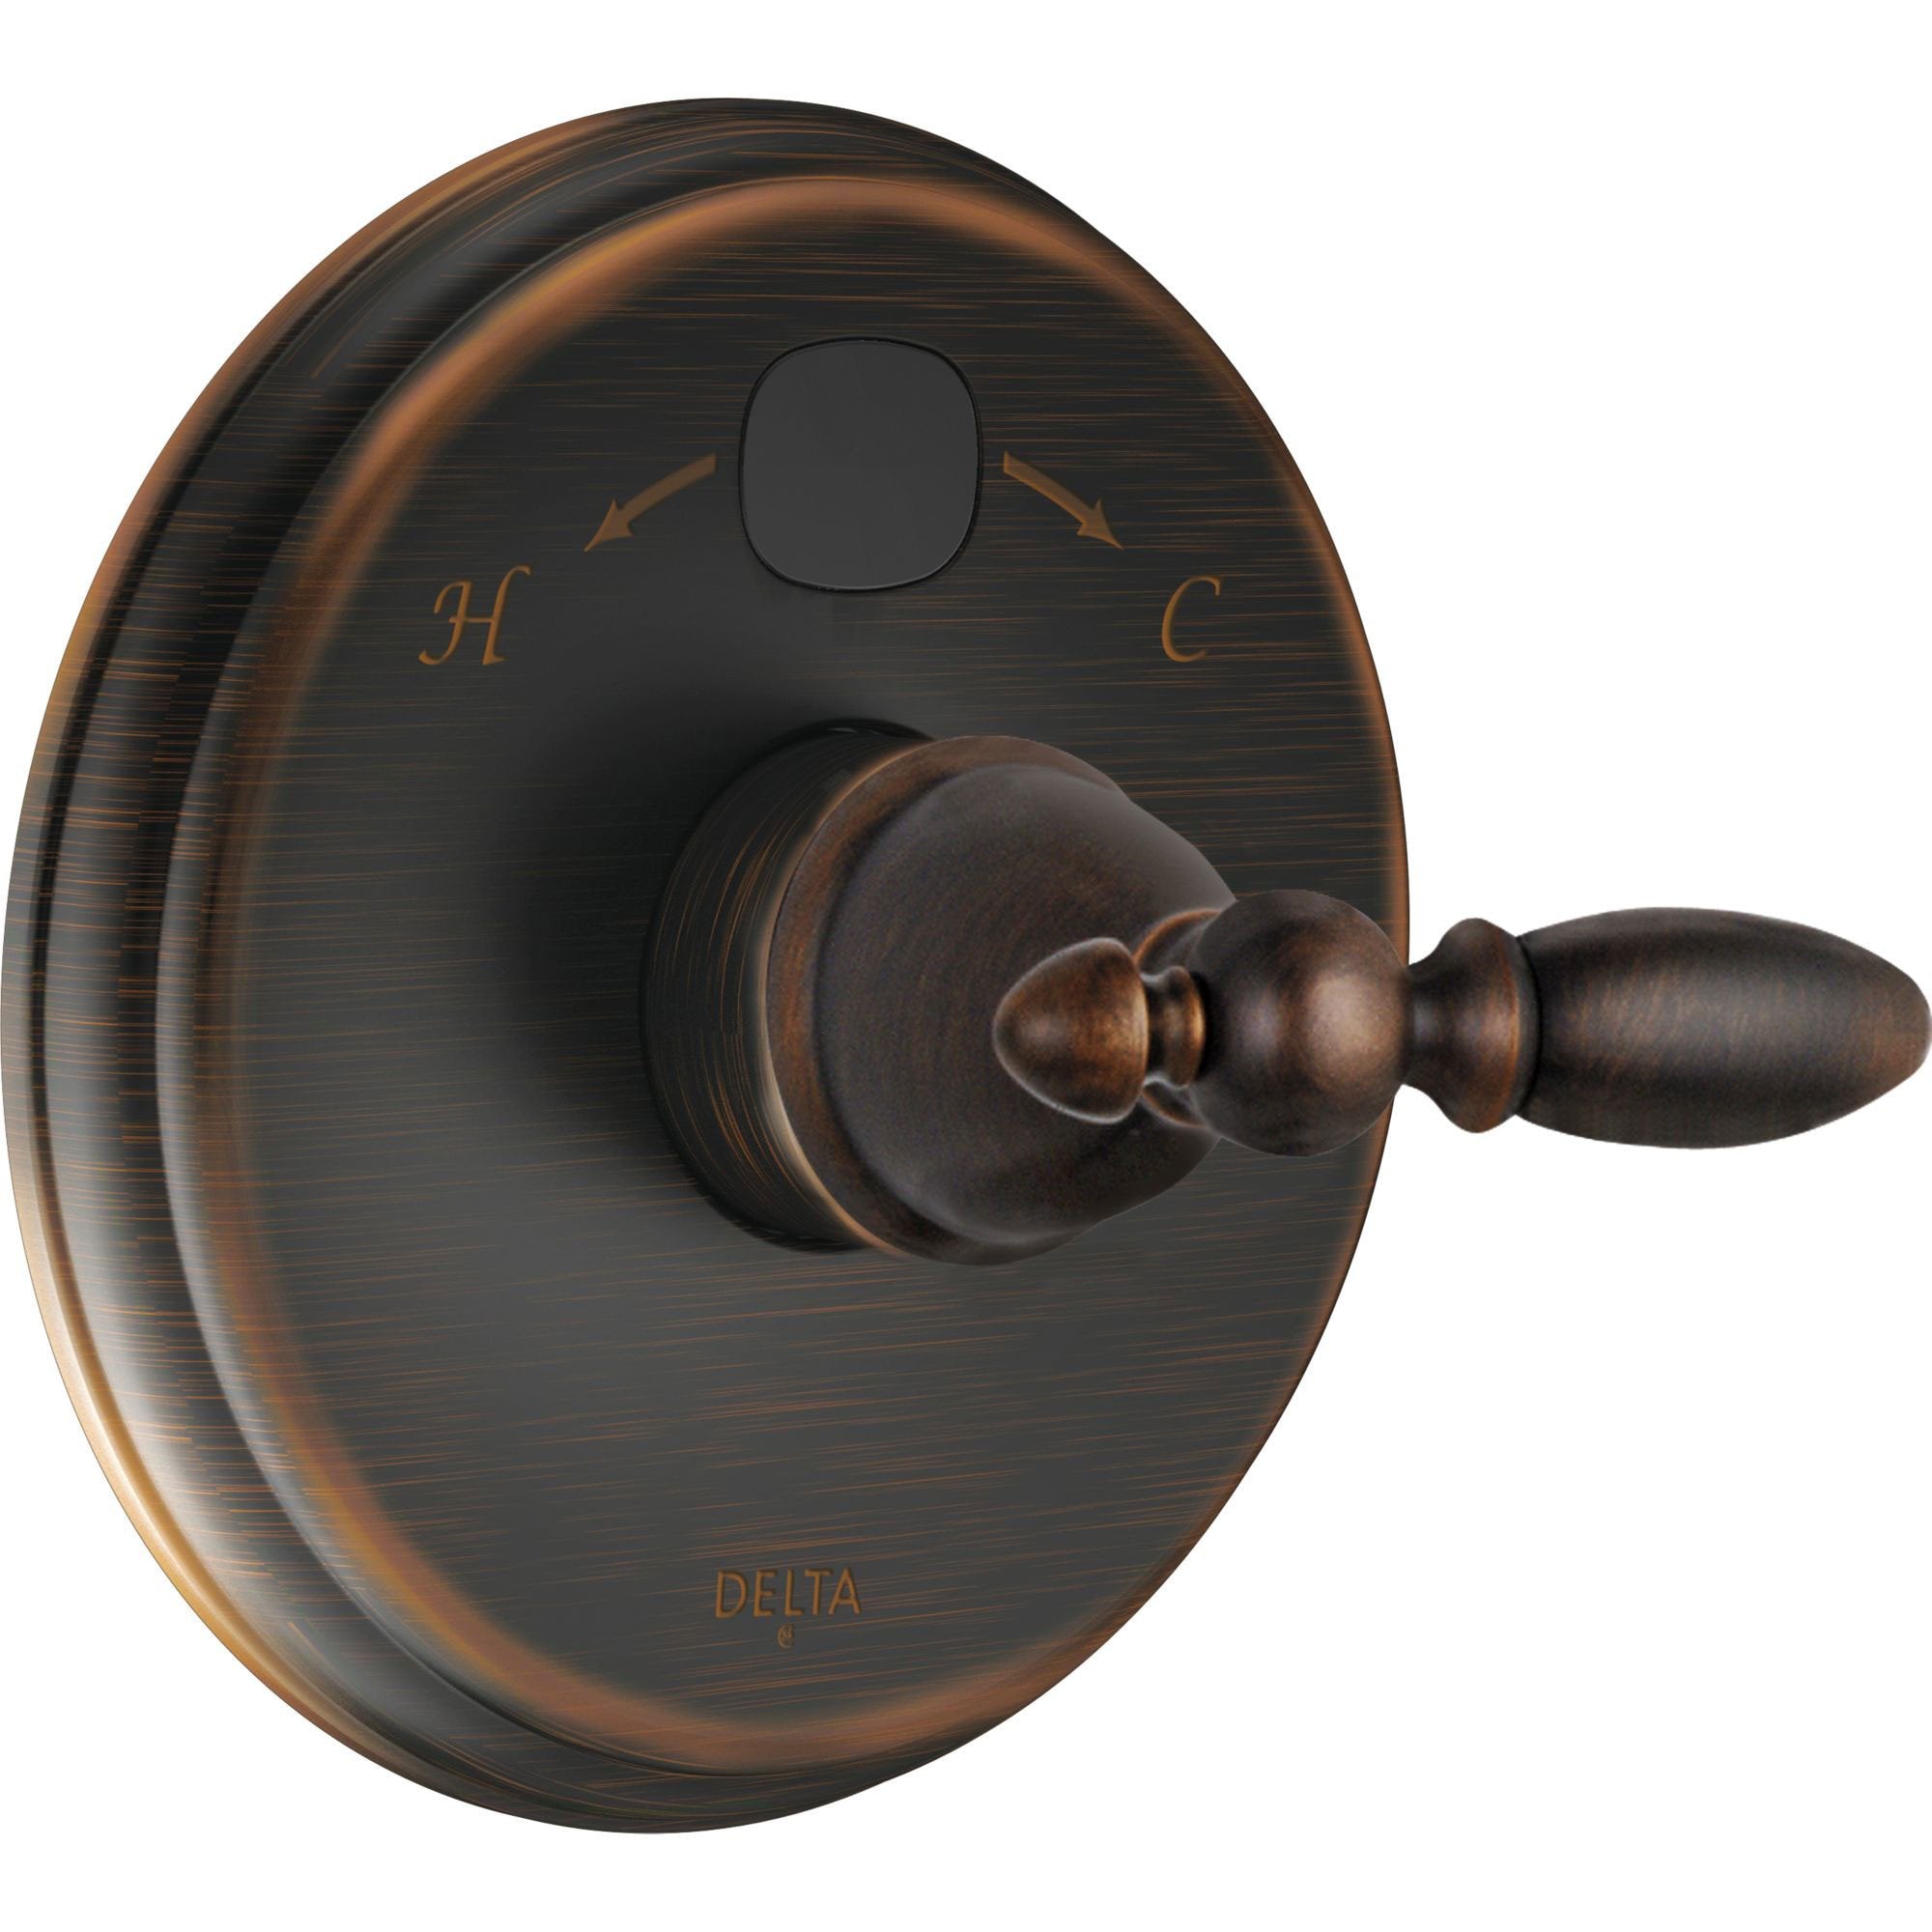 Delta Traditional 14 Series Temp2O Venetian Bronze Finish Pressure Balanced Shower Faucet Control with Digital Display INCLUDES Rough-in Valve with Stops and Single Lever Handle D1281V